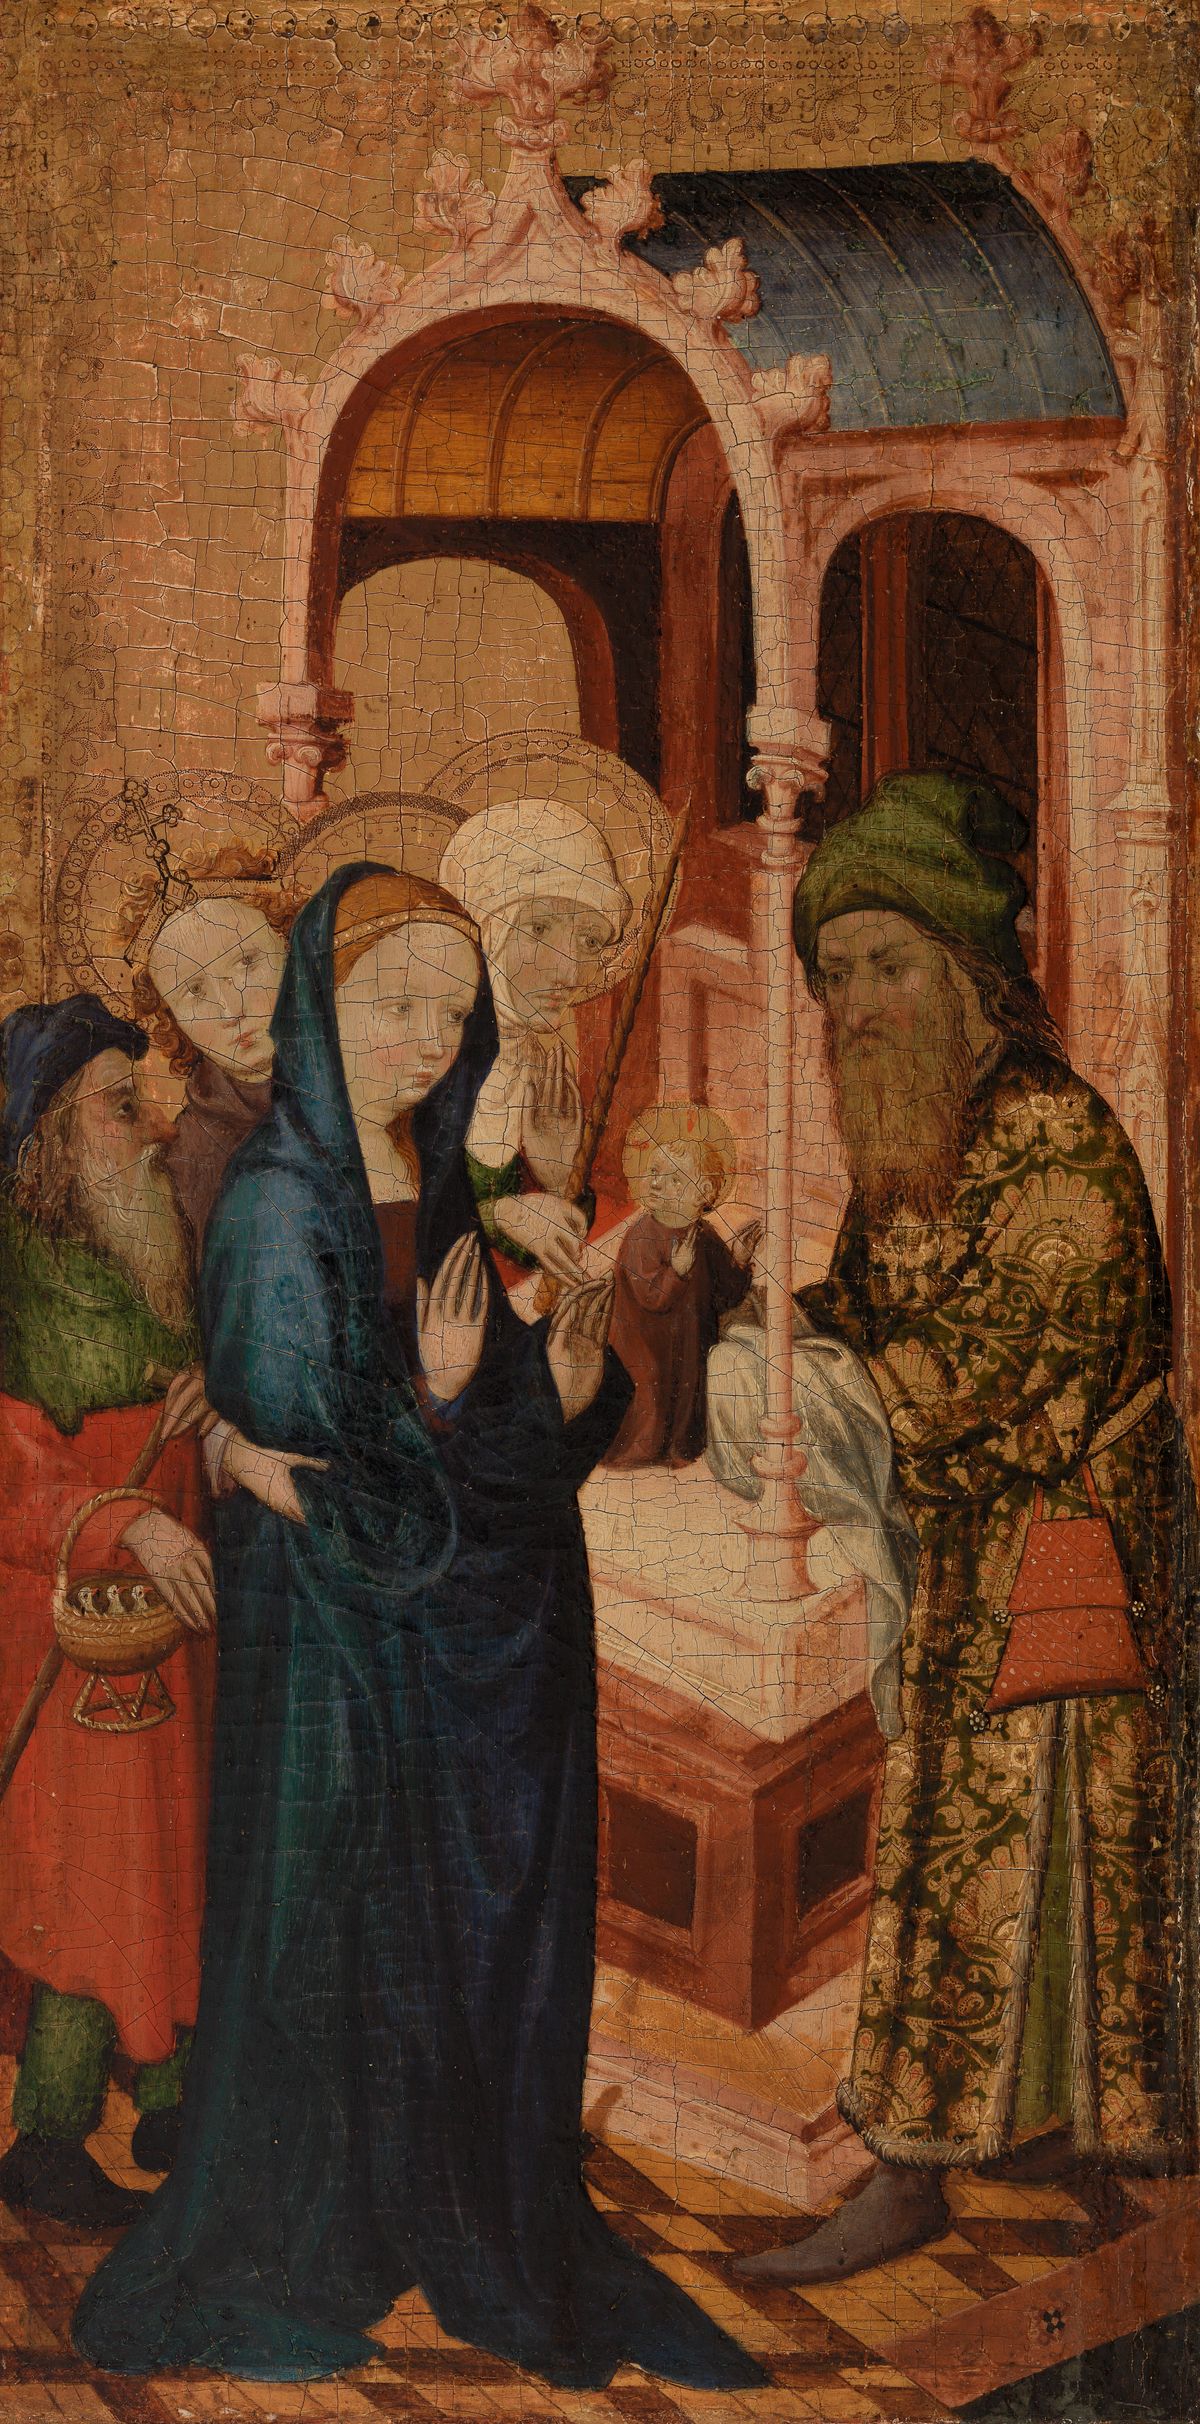 Presentation of Christ in the Temple (Early 15th century) by Miguel Alcañiz - Public Domain Catholic Painting